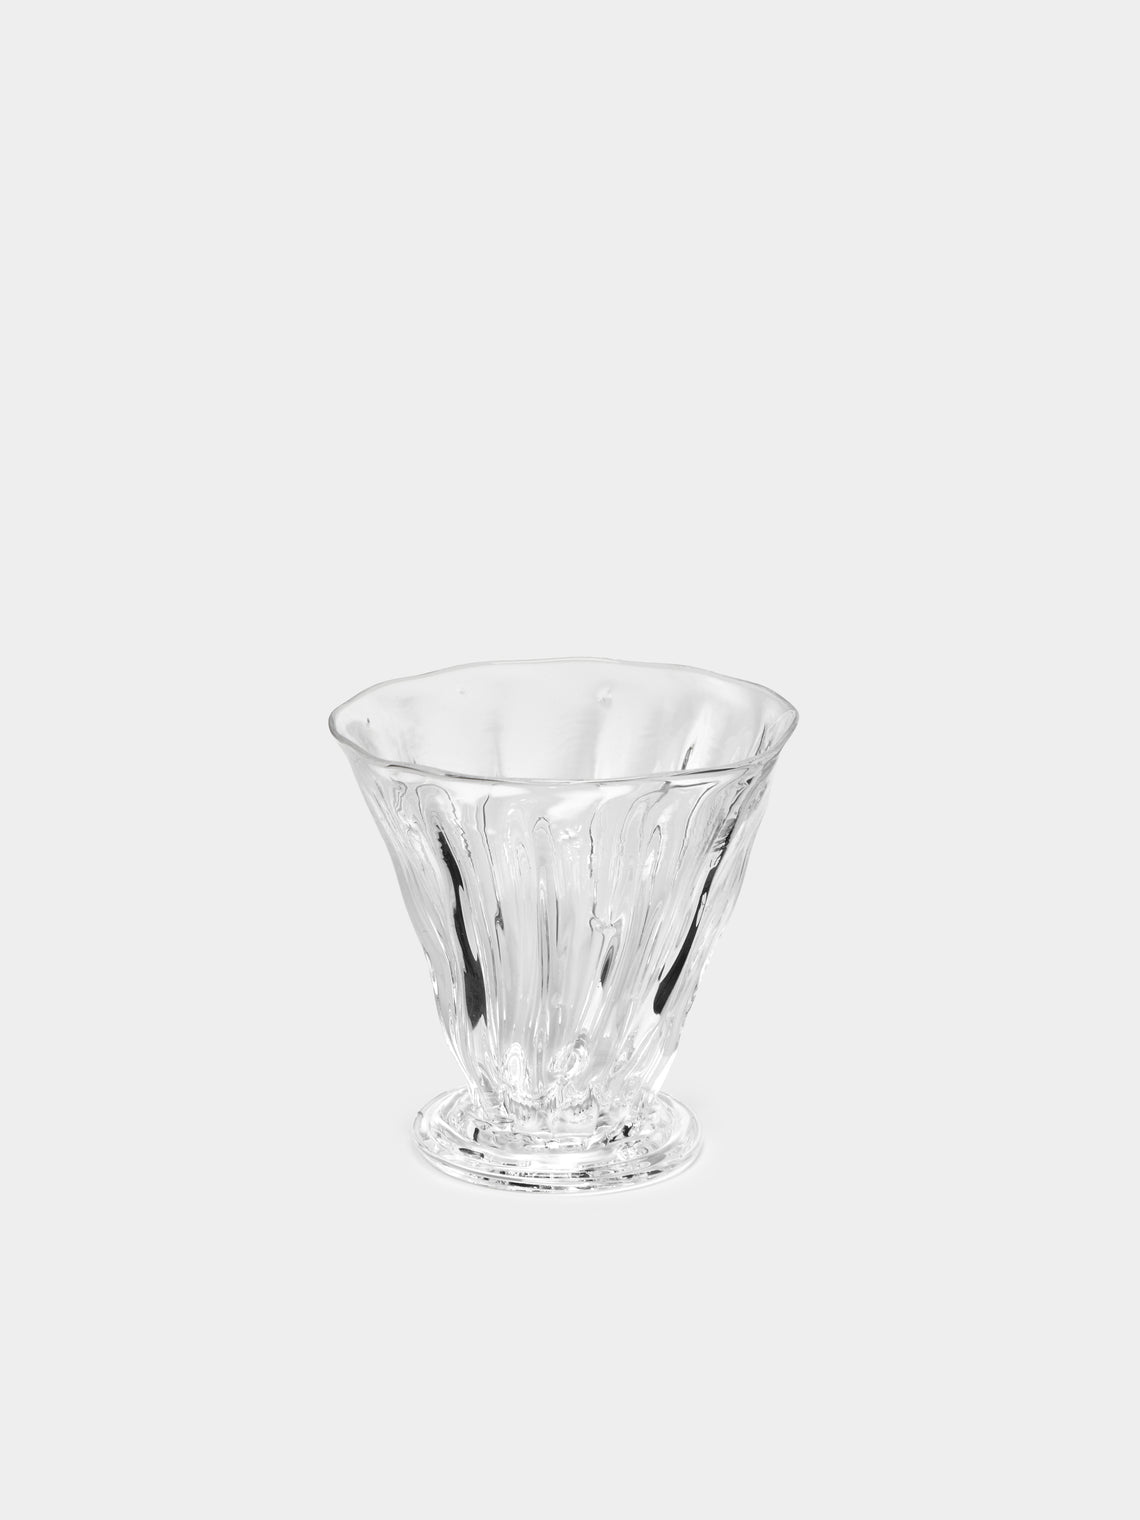 Alexander Kirkeby - Hand-Blown Crystal Small Tumblers (Set of 2) -  - ABASK - 